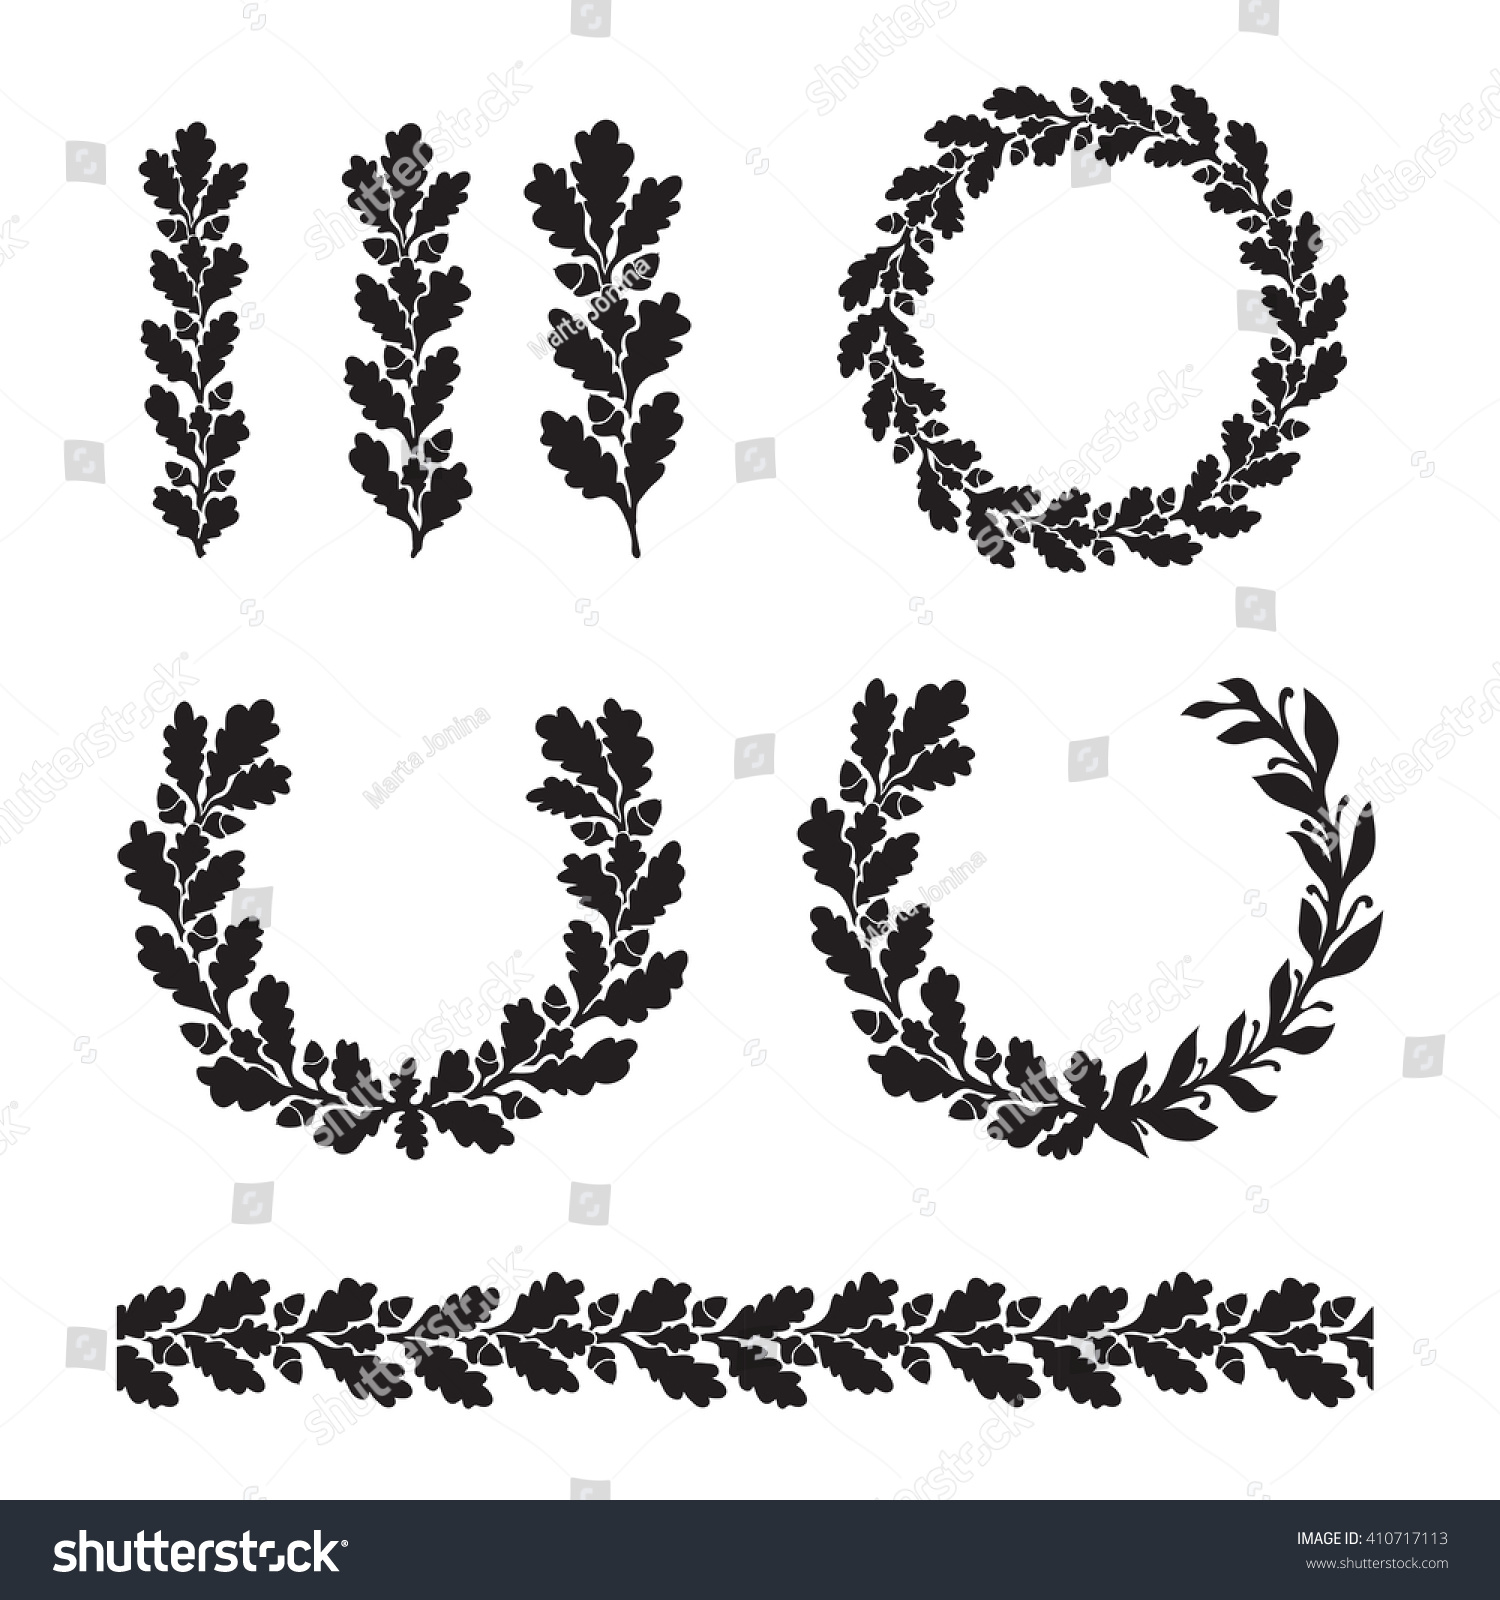 SVG of Silhouette oak wreaths in different  shapes - half circle, circle, branch and seamless border svg